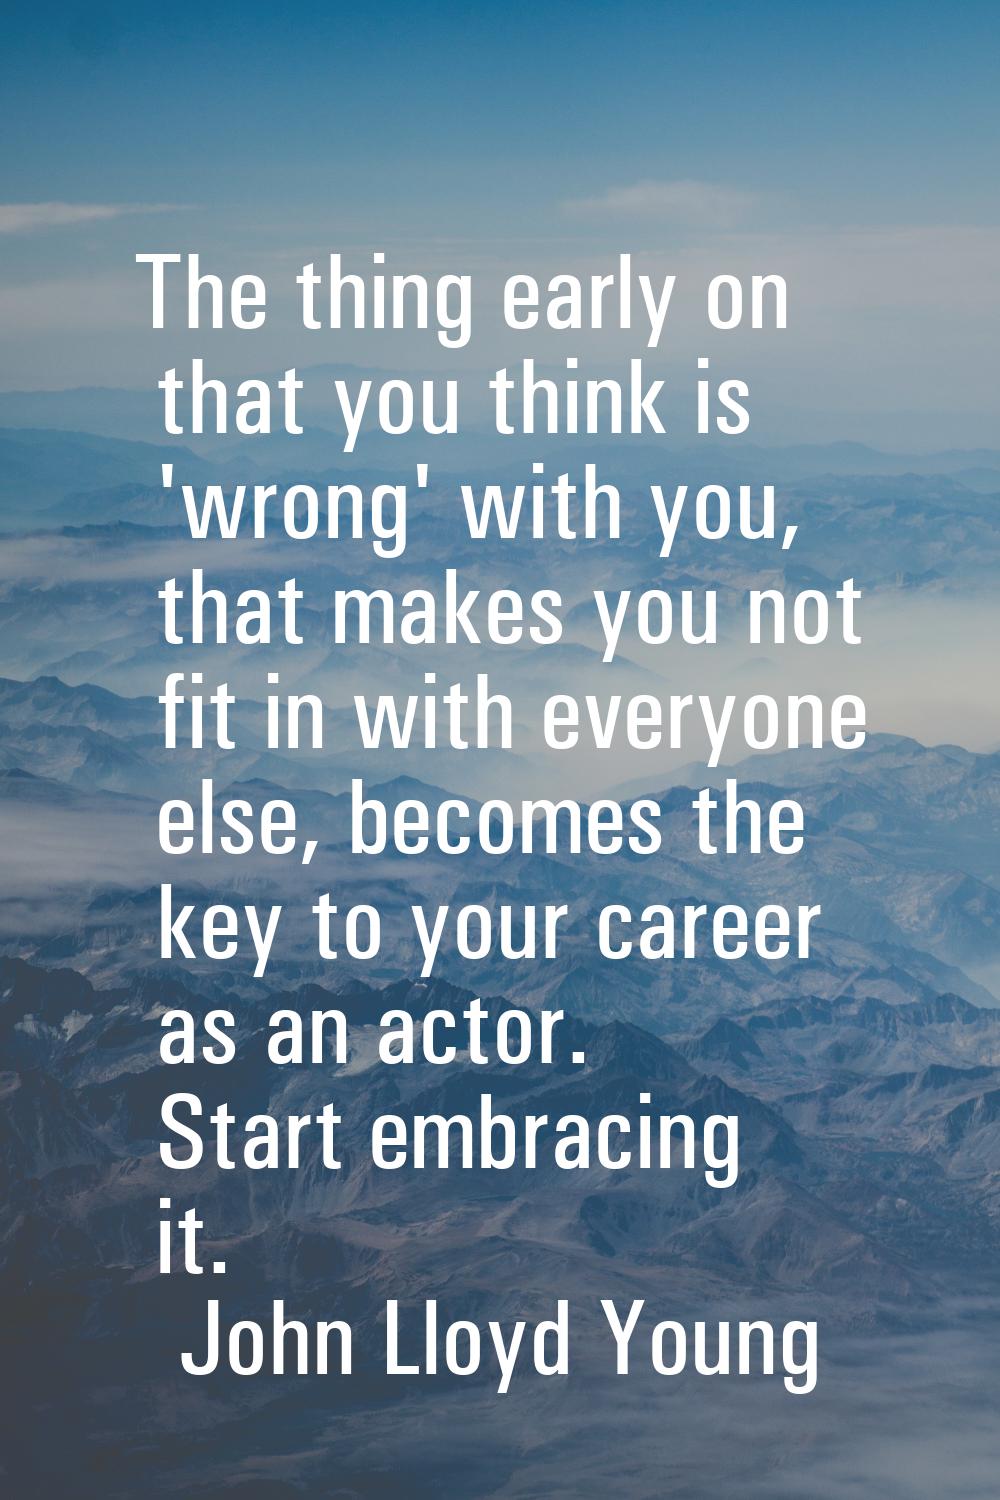 The thing early on that you think is 'wrong' with you, that makes you not fit in with everyone else